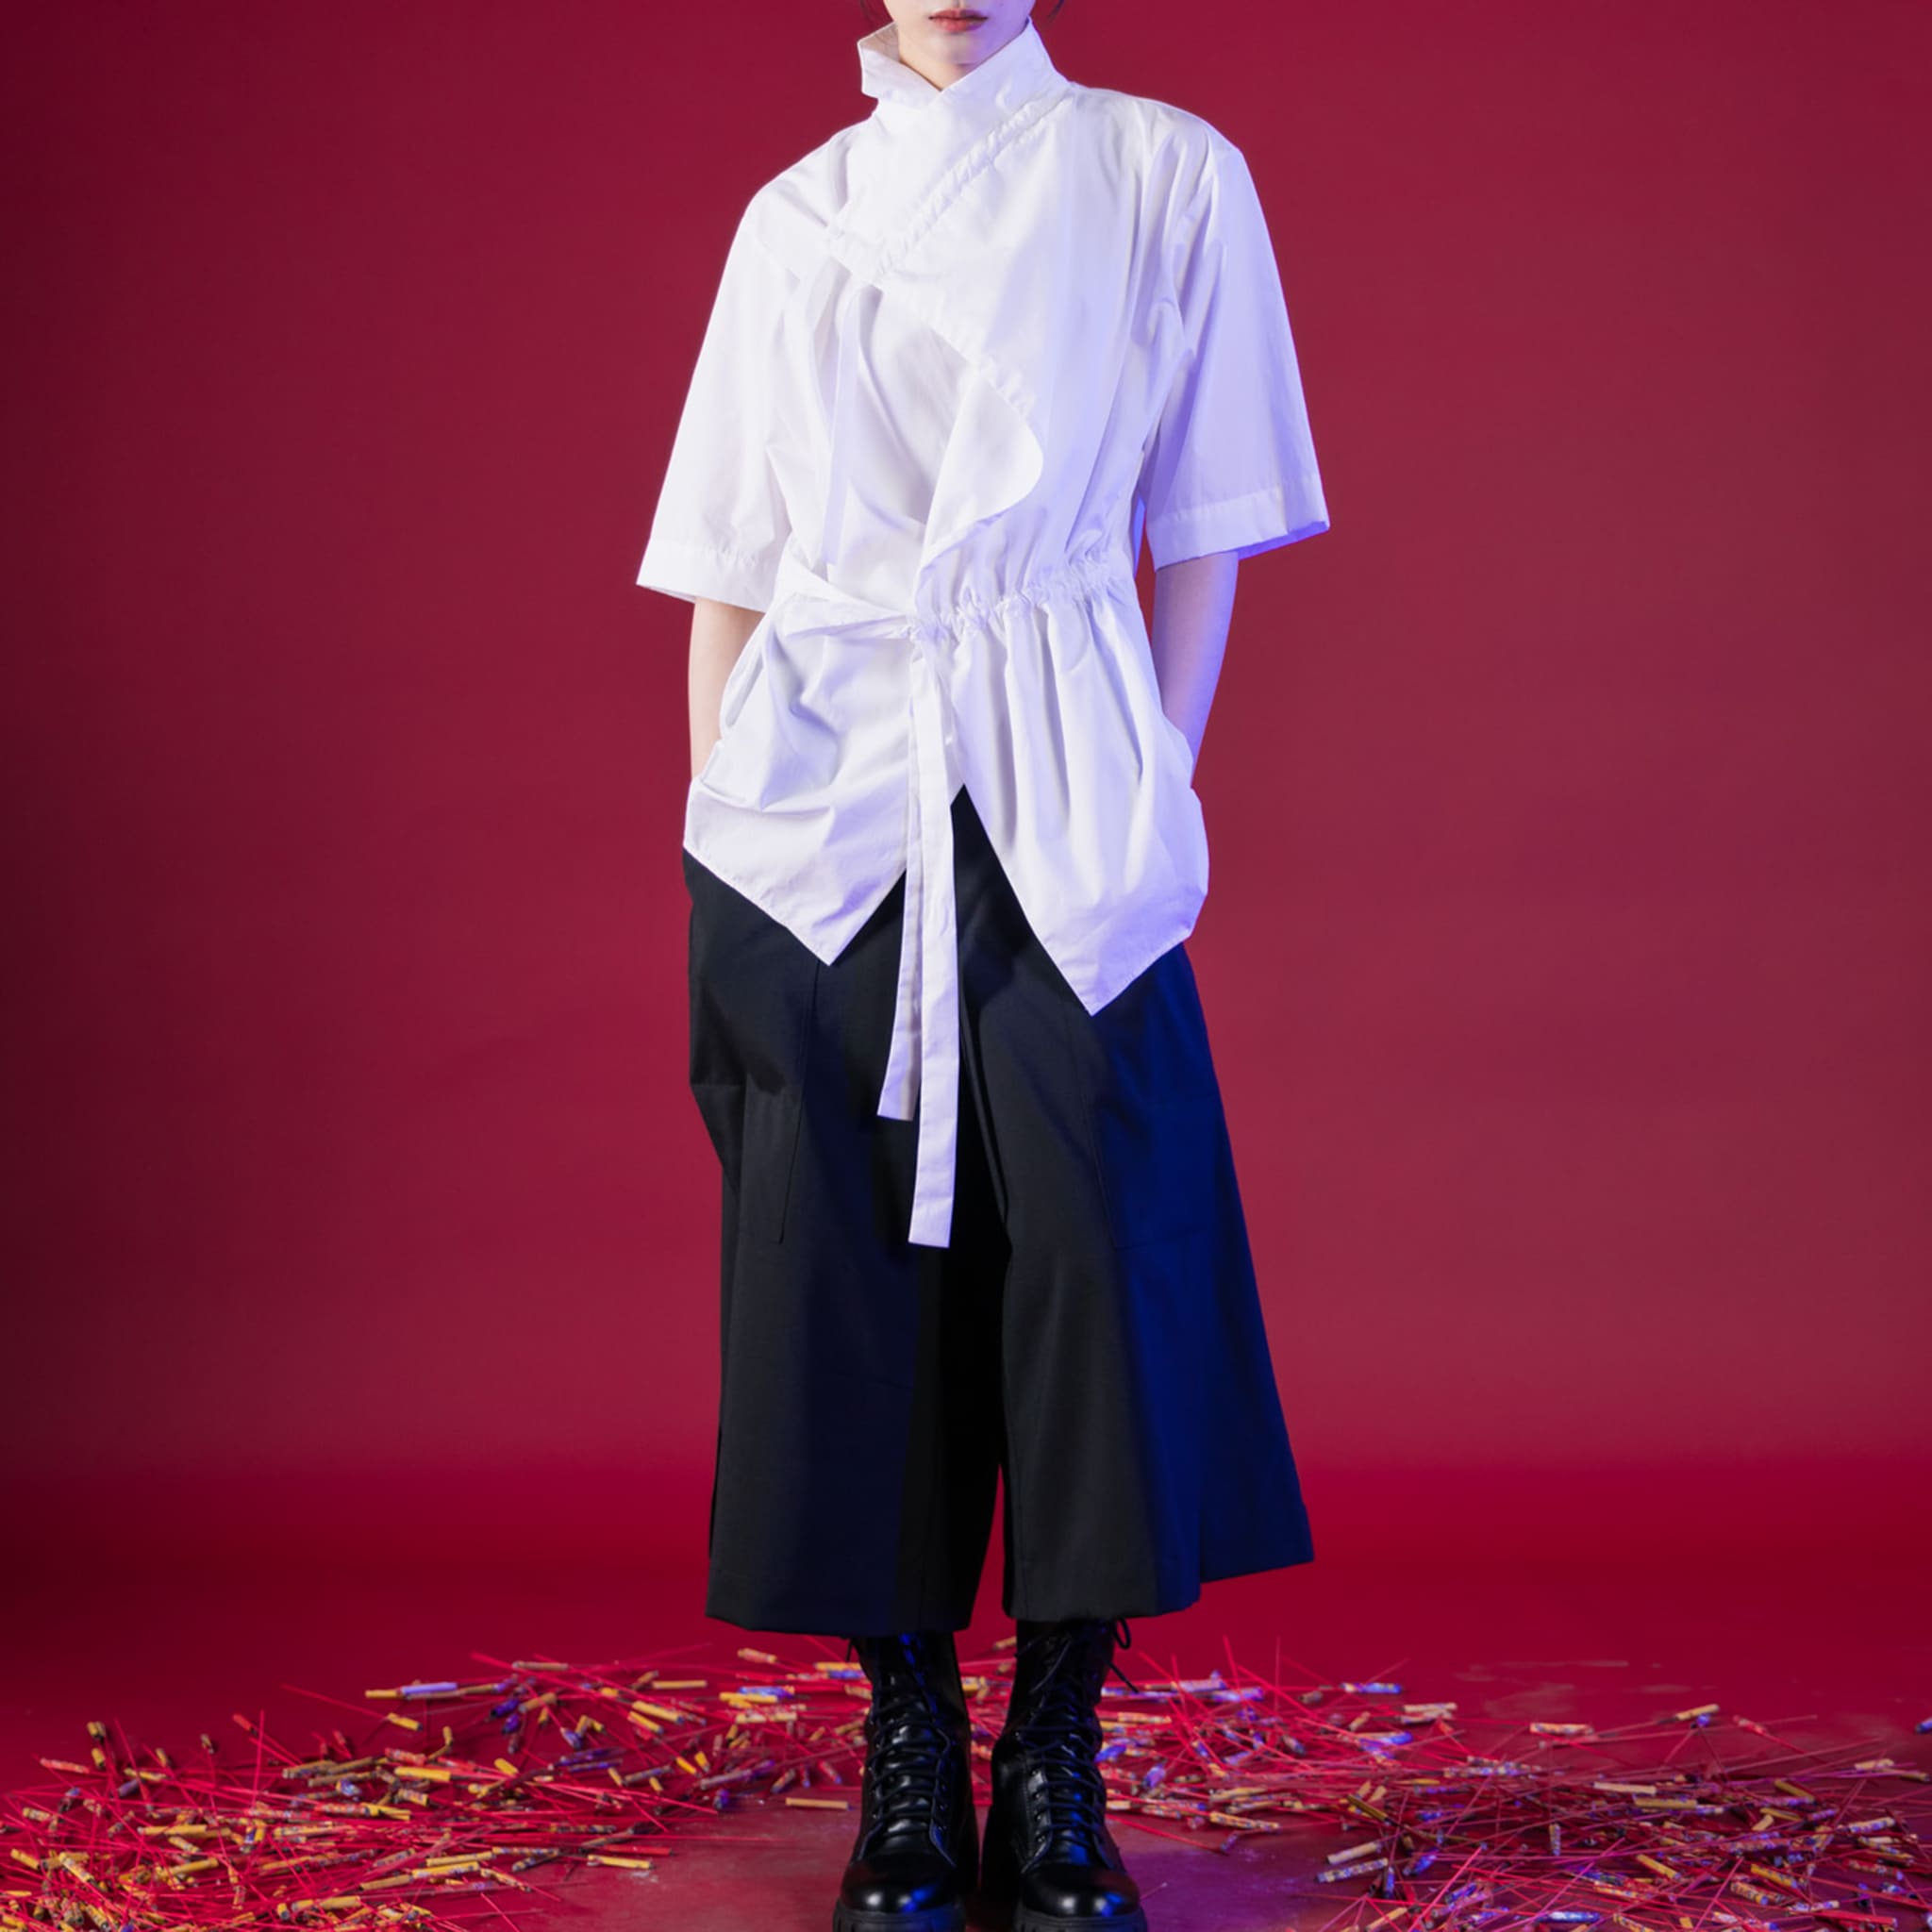 Kimono Style Deconstructed Shirt With Short Sleeves